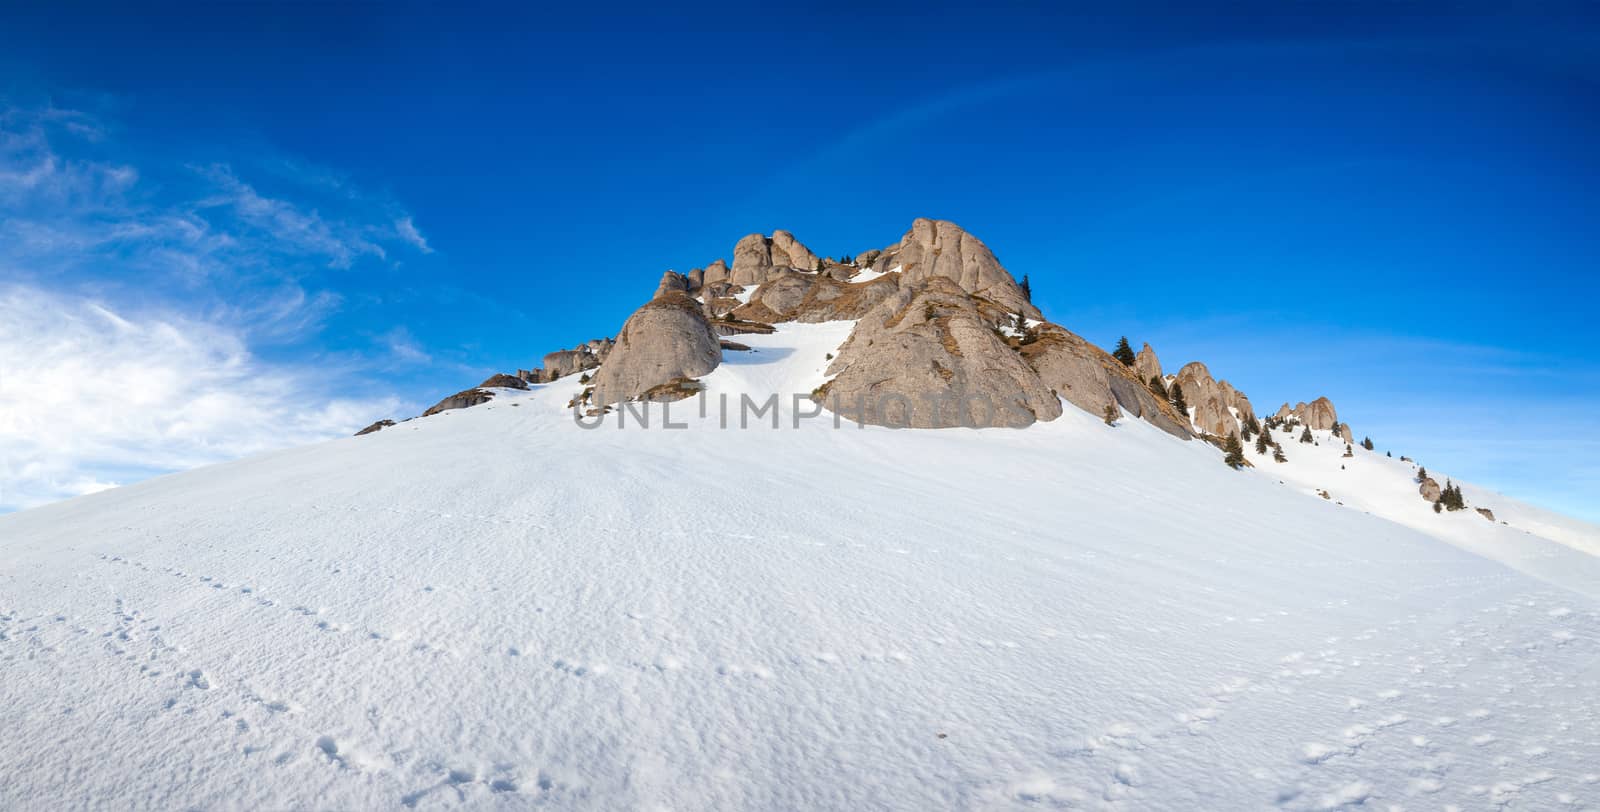 Panoramic view of Mount Ciucas peak covered in snow at sunset on by PixAchi